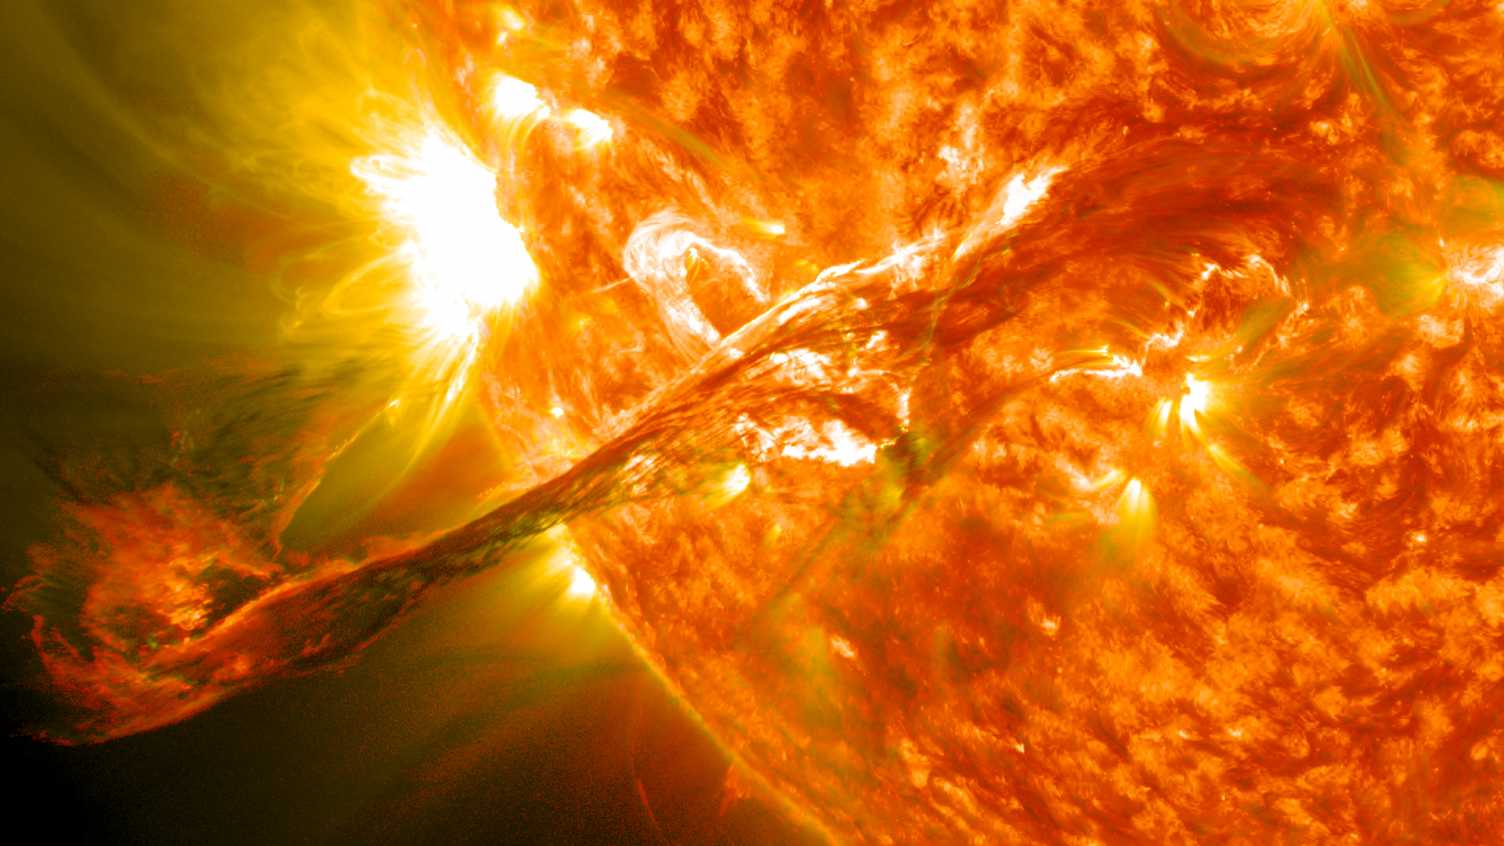 Thumbnail for Scientists observe largest solar flare in 12 years | Mathematics and Statistics